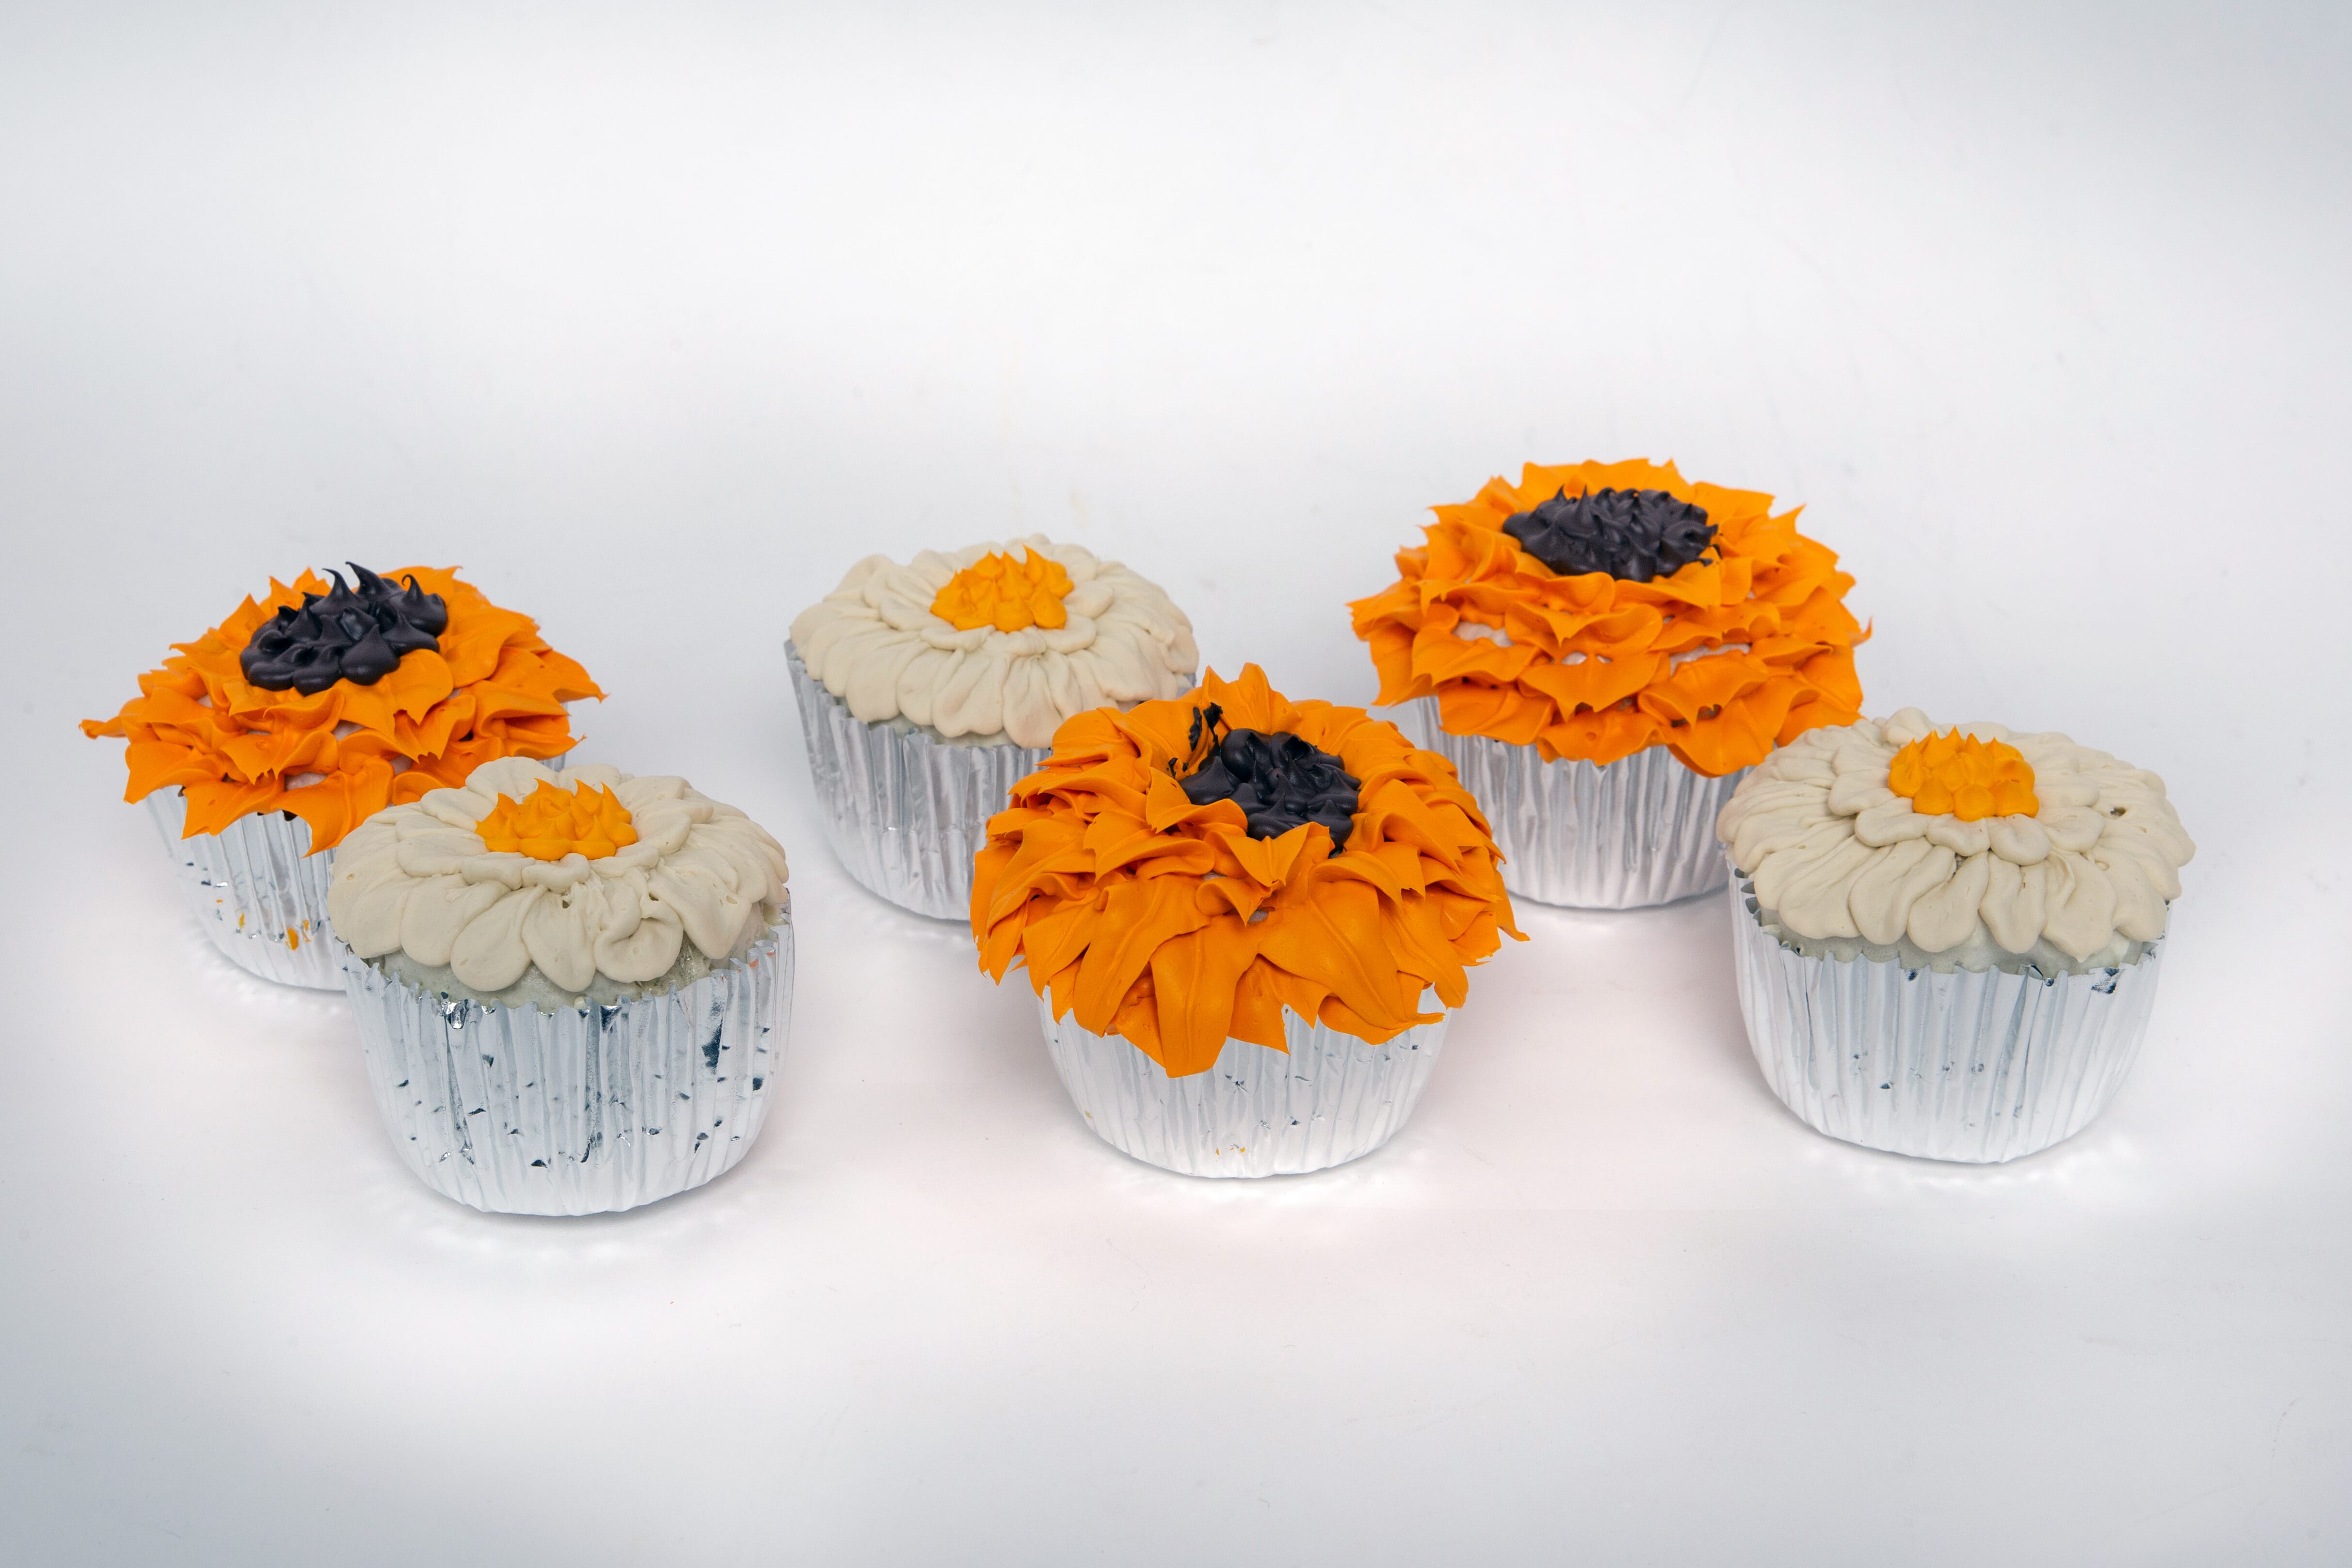 Fake Cupcakes with Sunflower Design